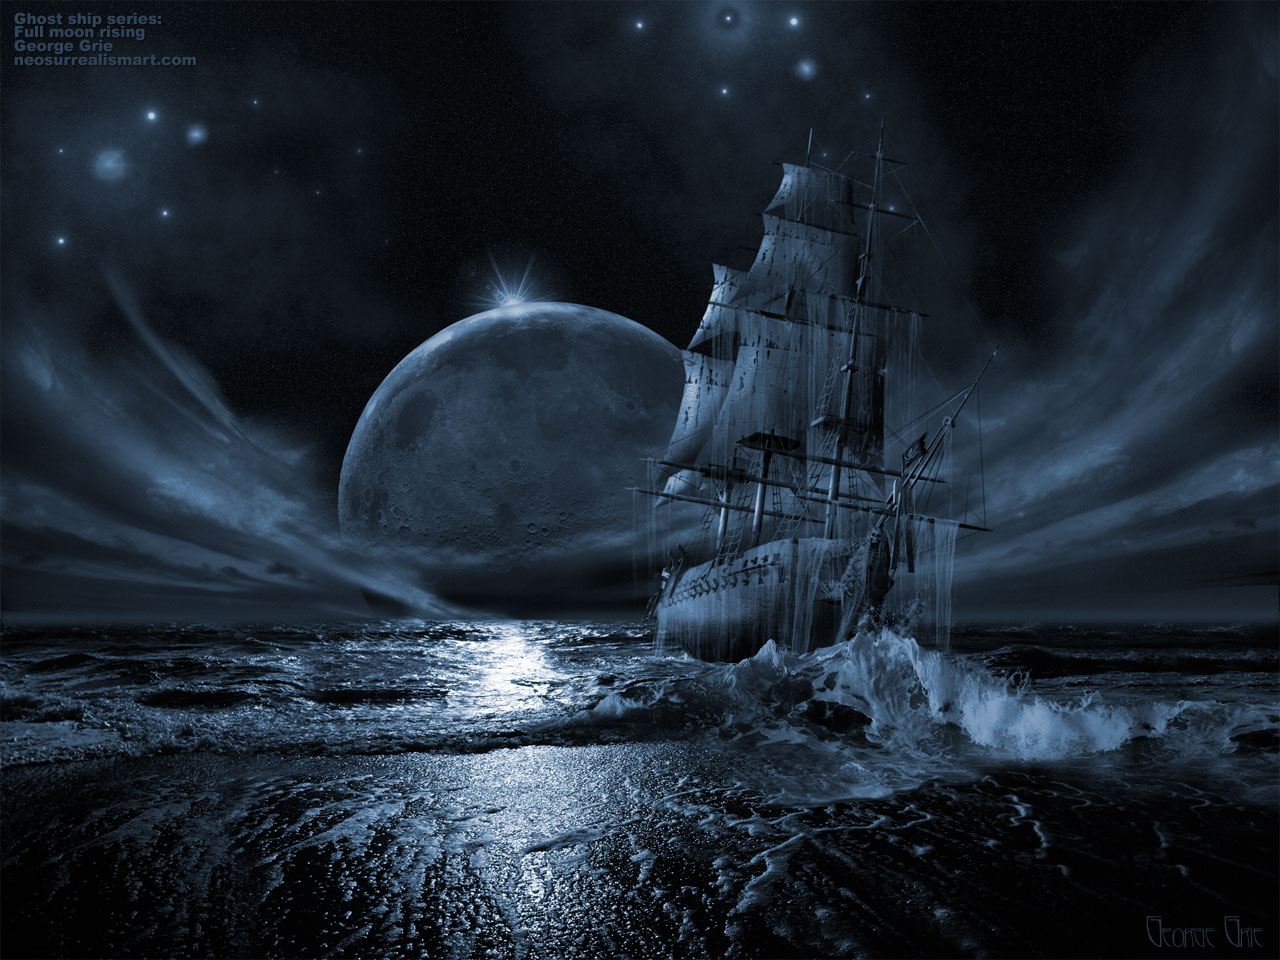 Free HQ 71 483d Ghost Ship Poster Wallpaper   Free HQ Wallpapers